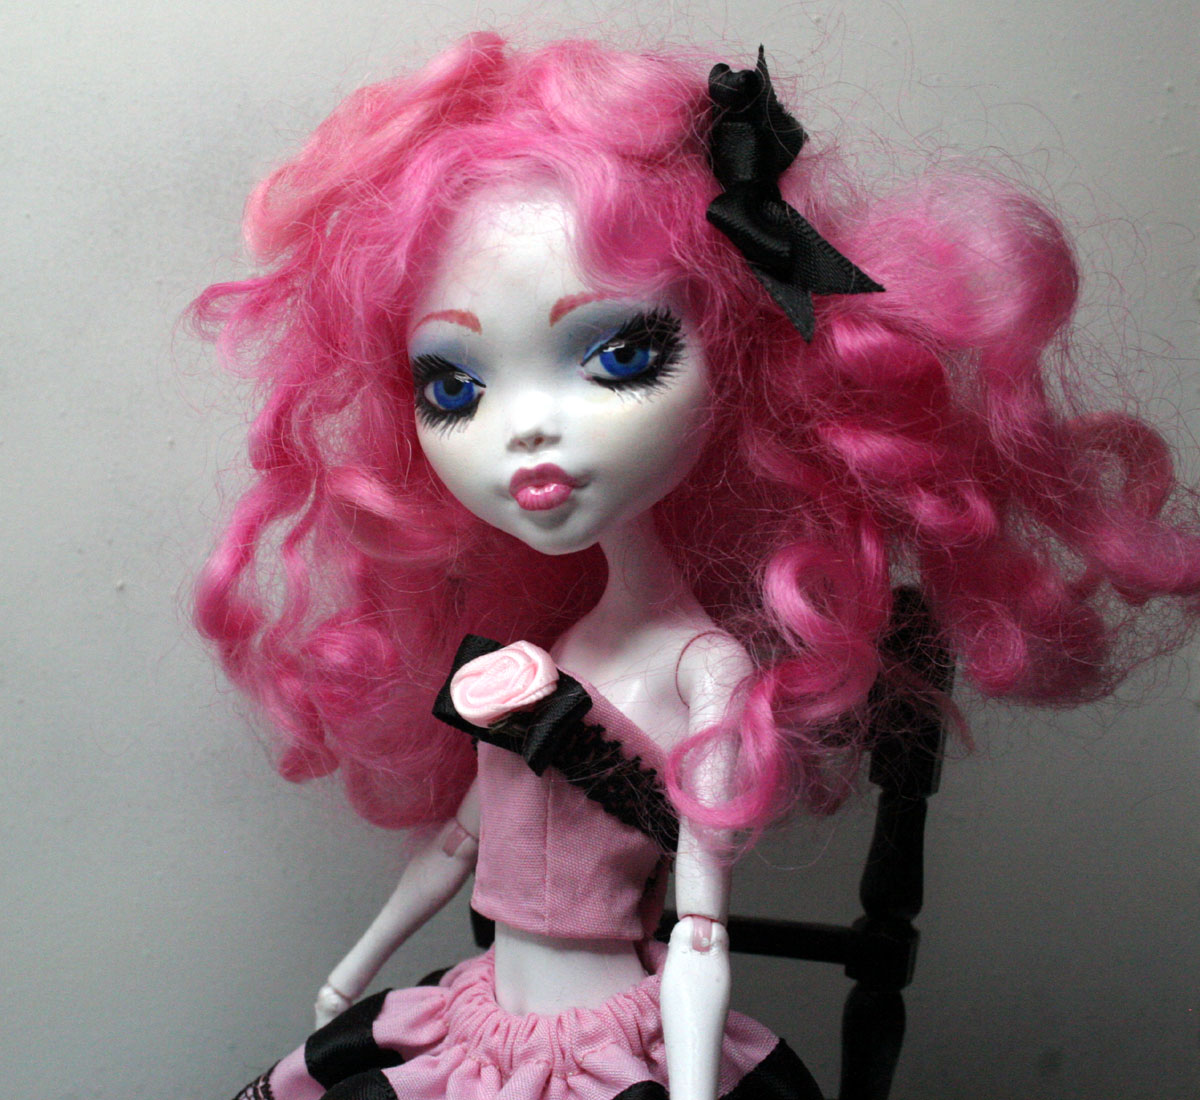 mymonstercrush: Candy Finished!